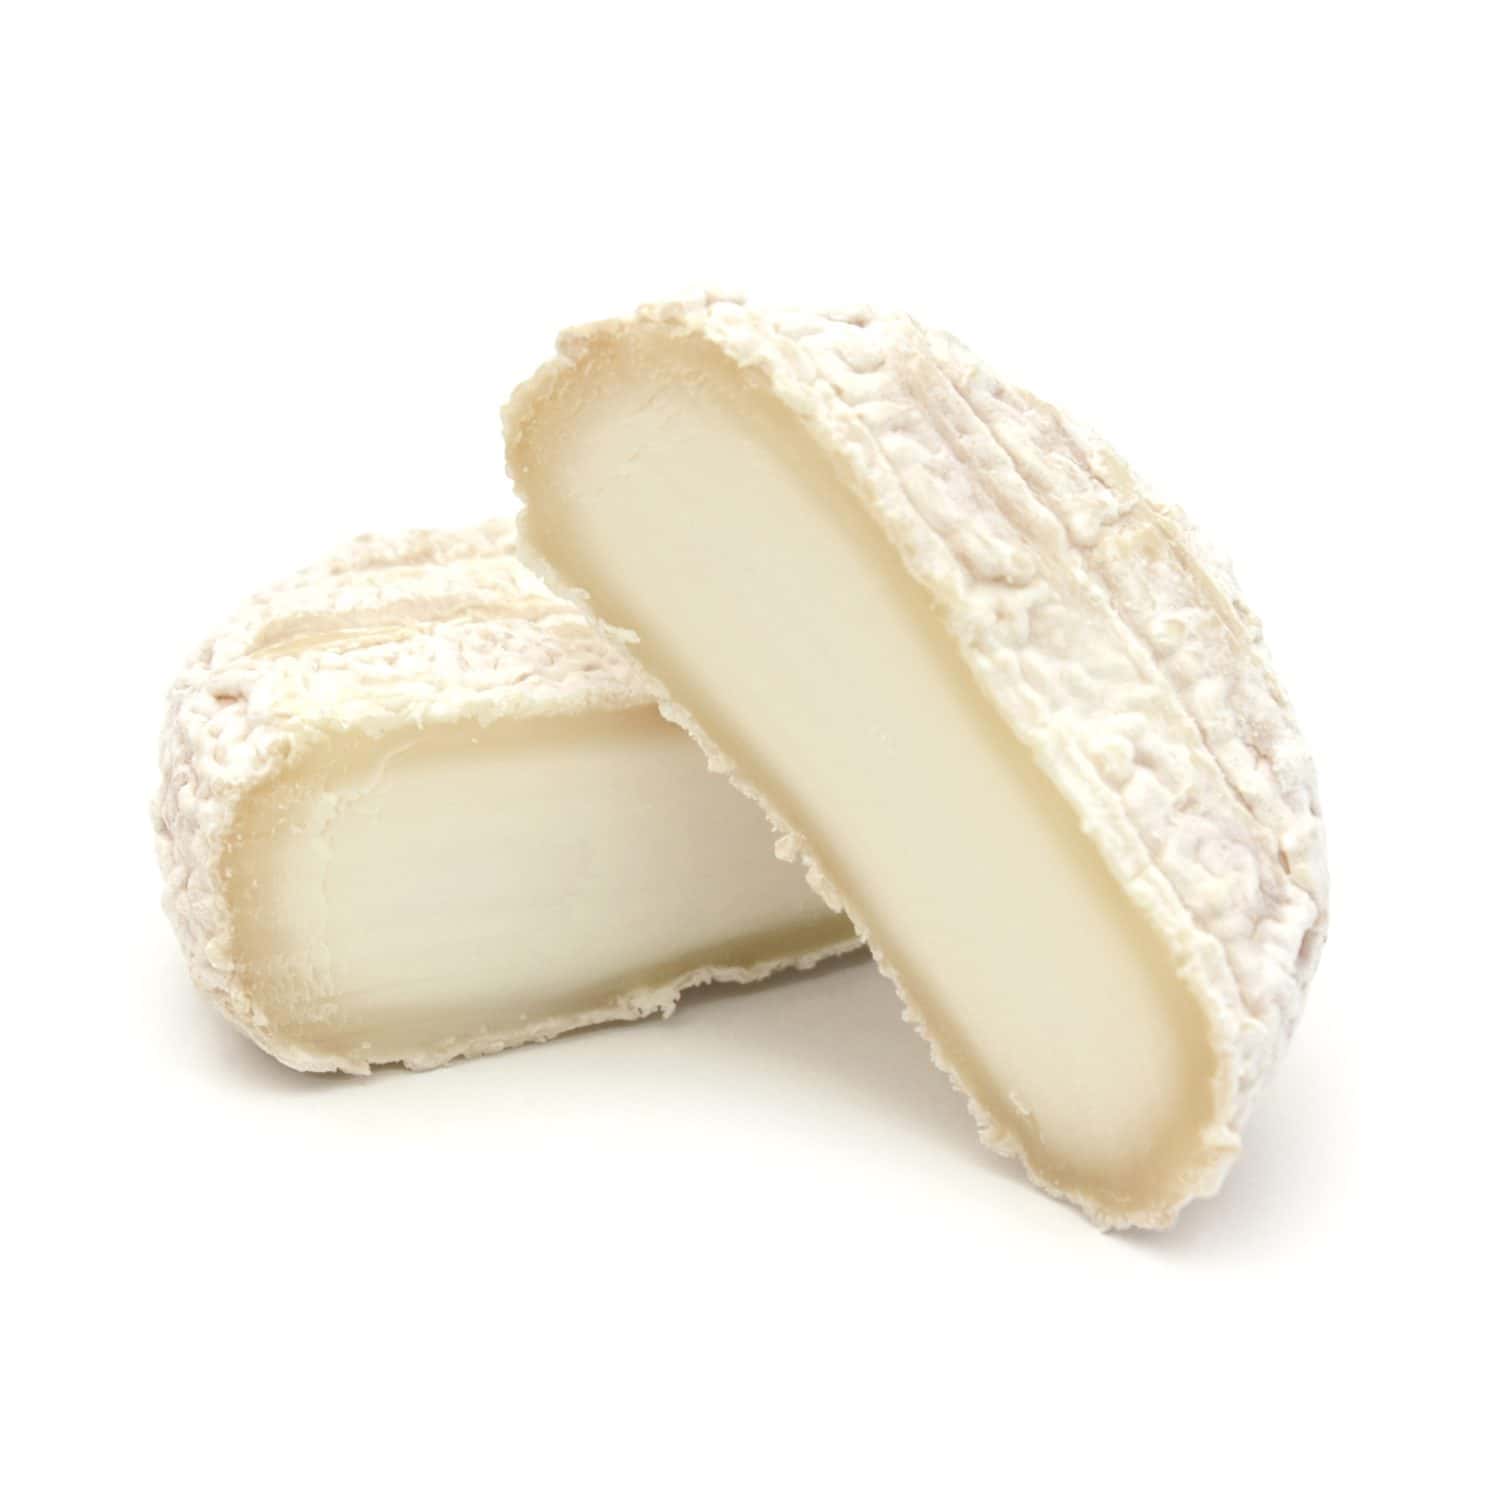 Picodon : famous French goat cheese